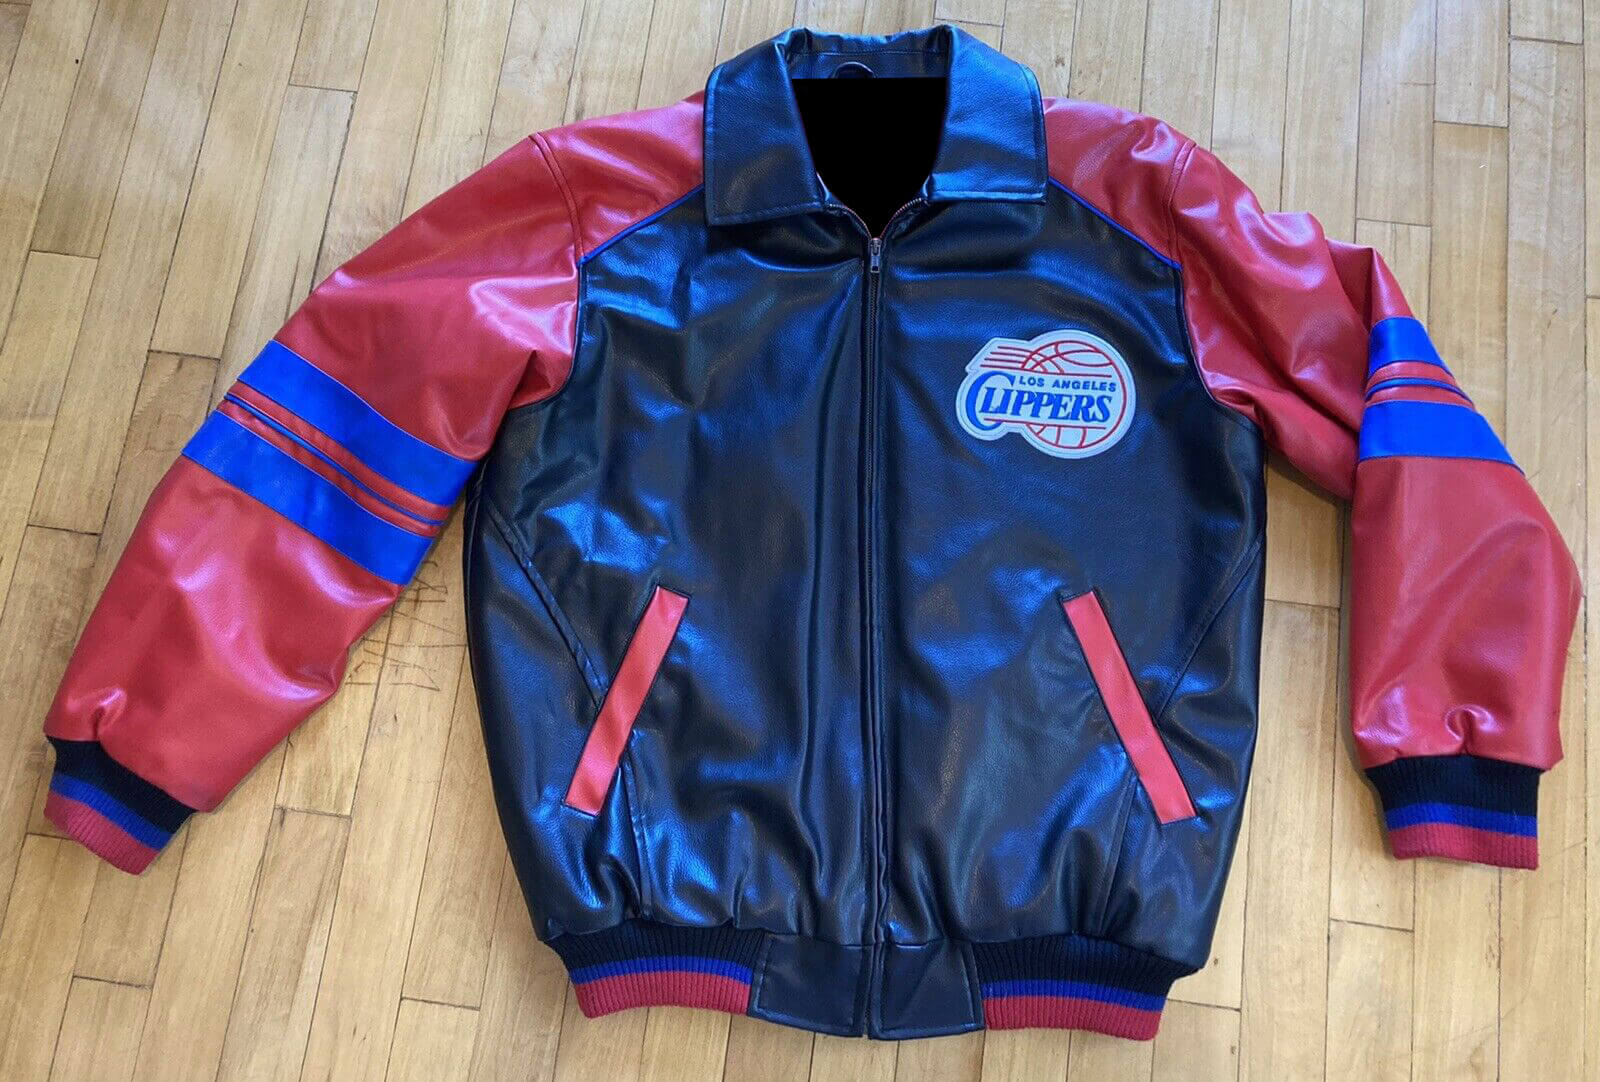 Los Angeles Clippers Accessories in Los Angeles Clippers Team Shop 